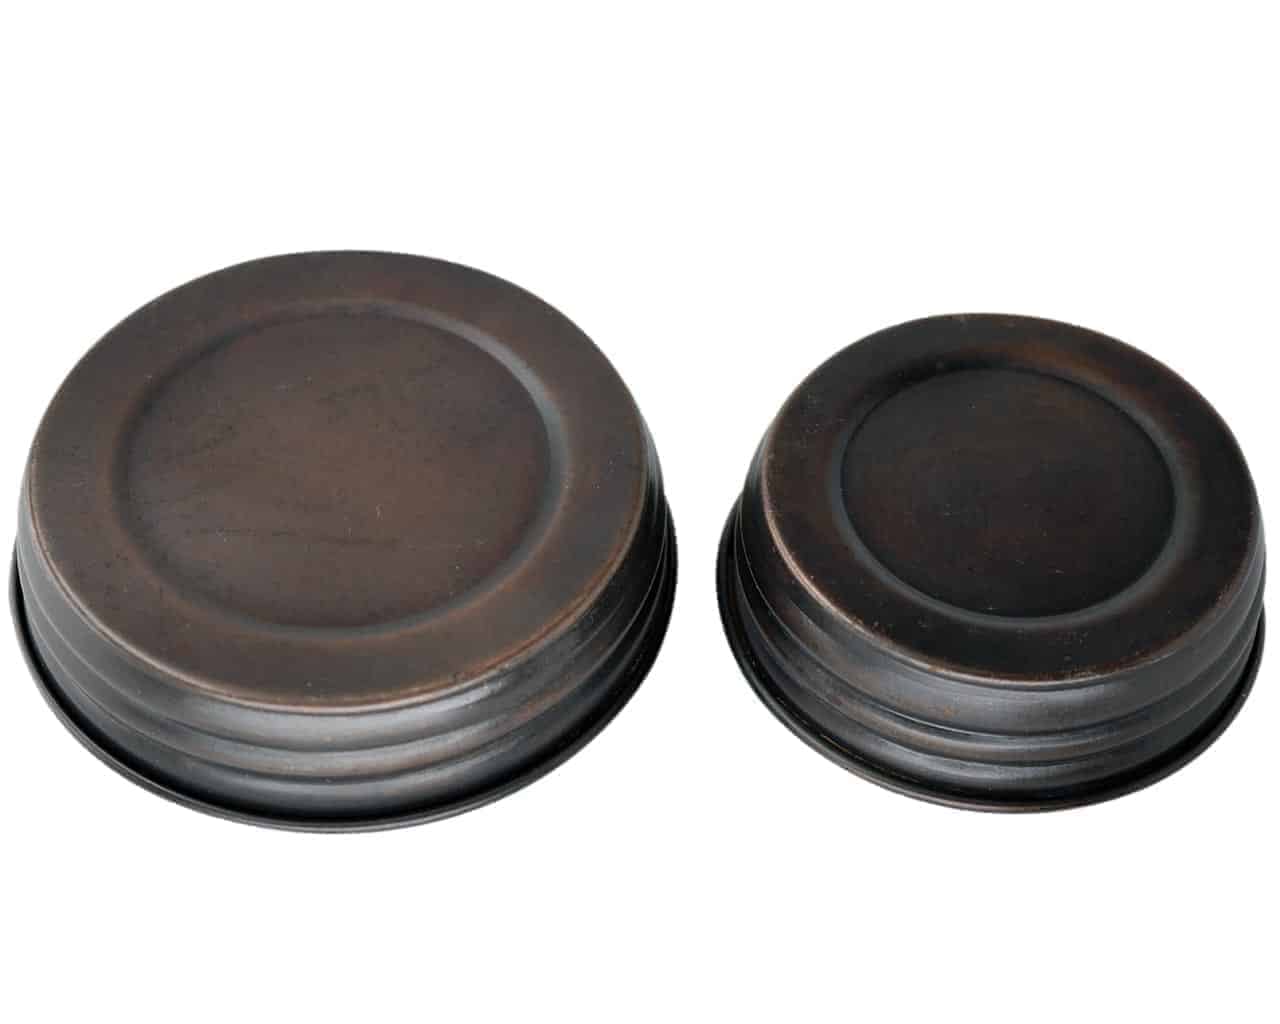 Oil rubbed bronze antique copper decorative lids for regular and wide mouth Mason jars